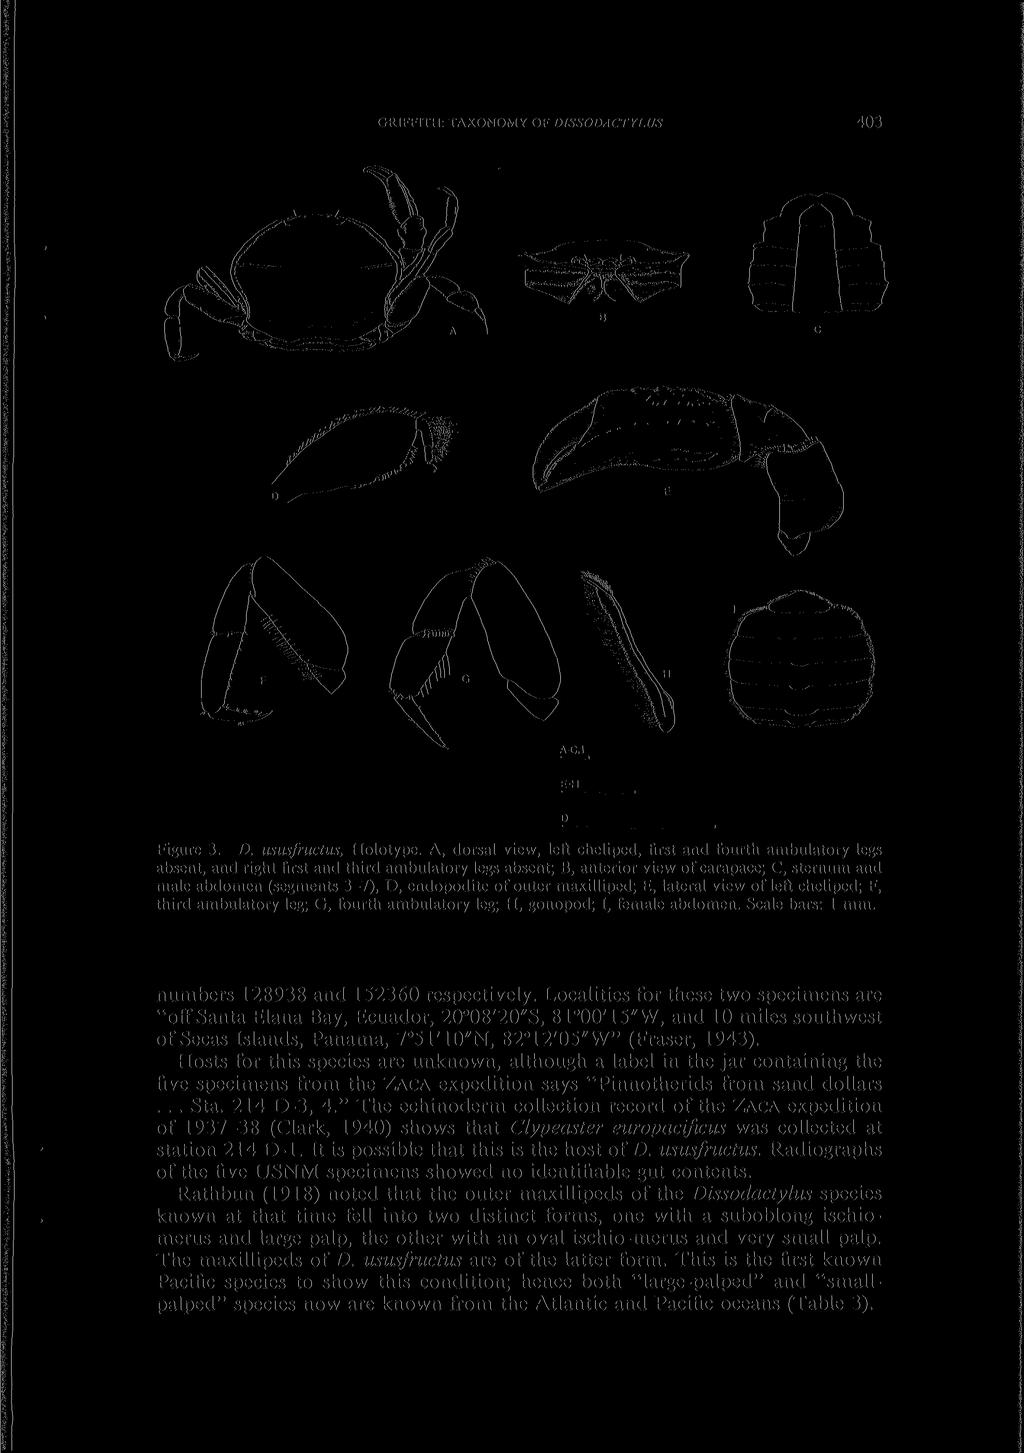 GRIFFITH: TAXONOMY OF DISSODACTYLUS 403 Figure 3. D. ususfructus, Holotype.